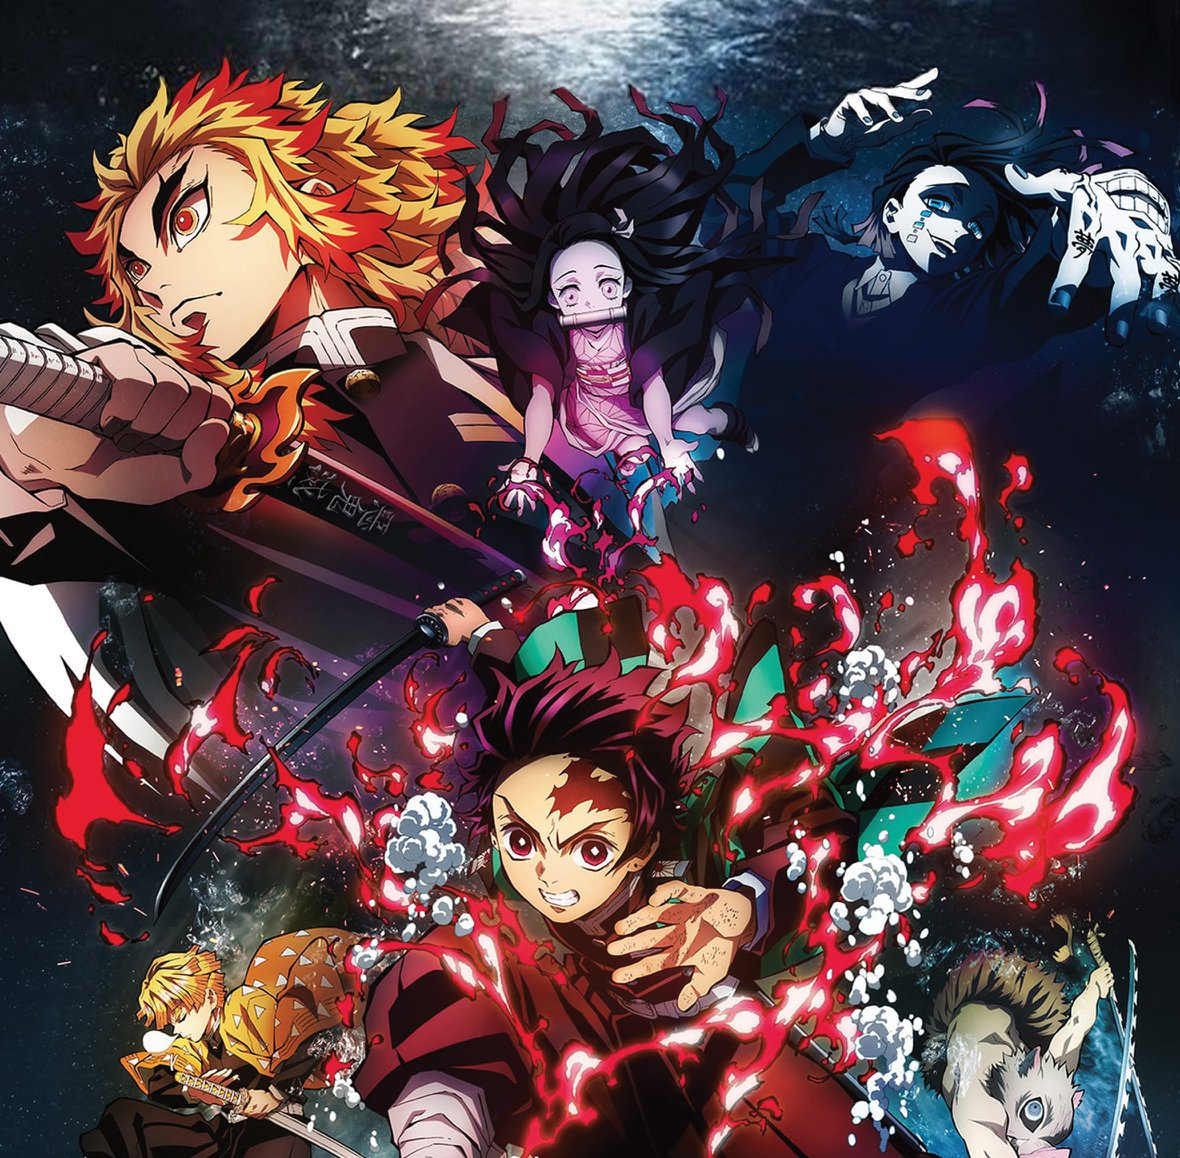 Demon Slayer Movie Review: Mugen Train Punches Above Its Class